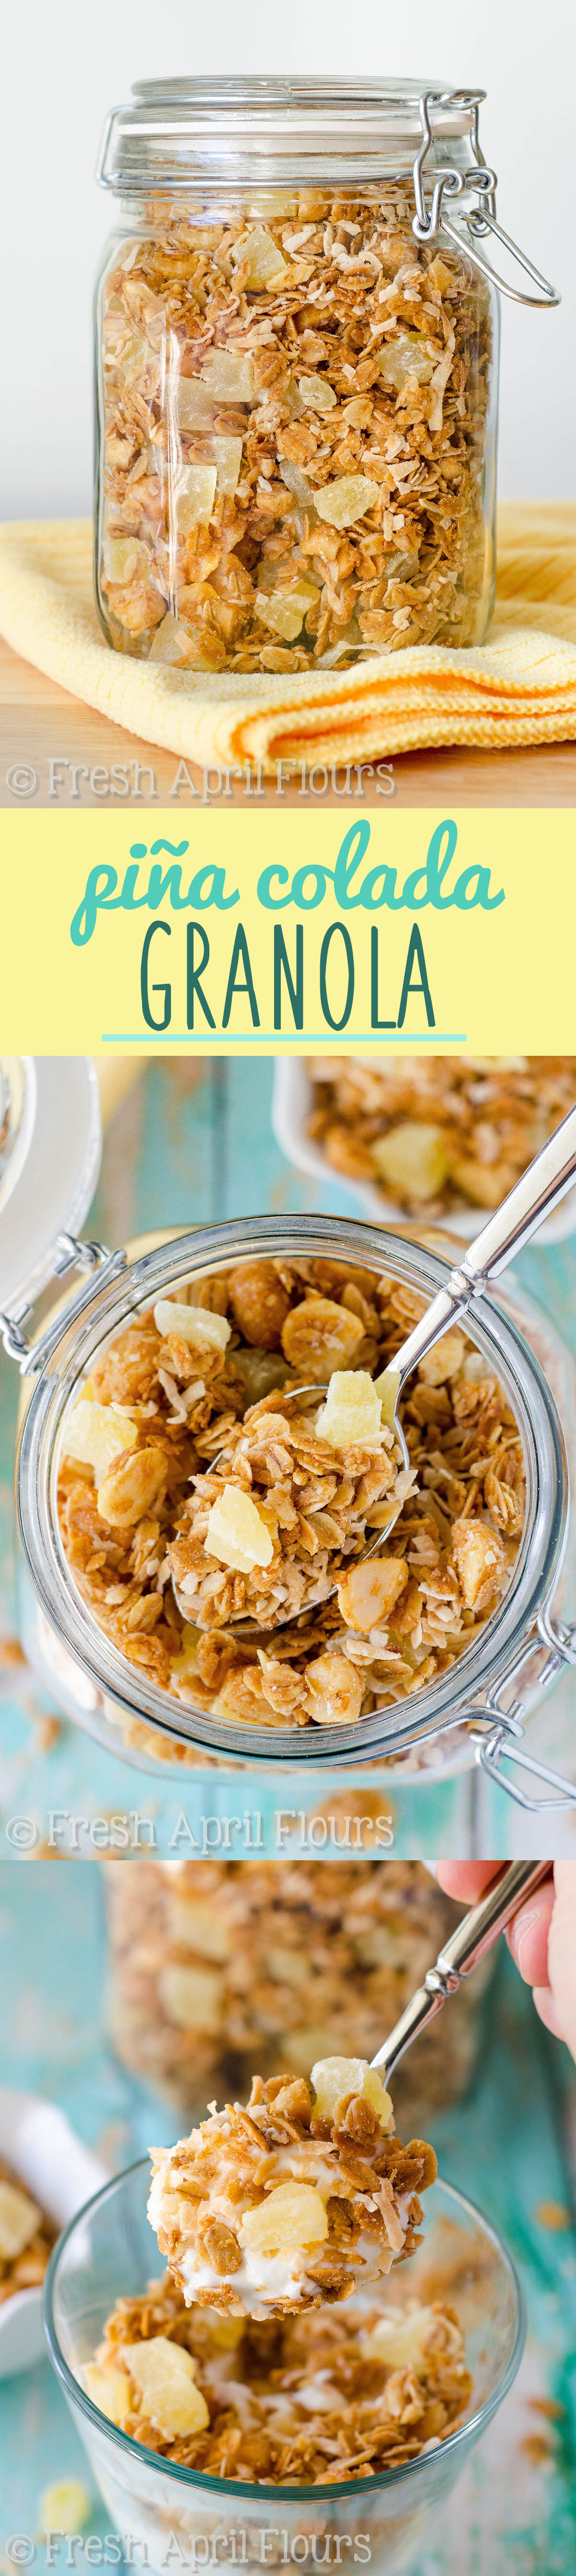 Piña Colada Granola: Homemade granola sweetened with coconut palm syrup and loaded with toasted coconut and macadamia nuts, and of course, pineapple! via @frshaprilflours